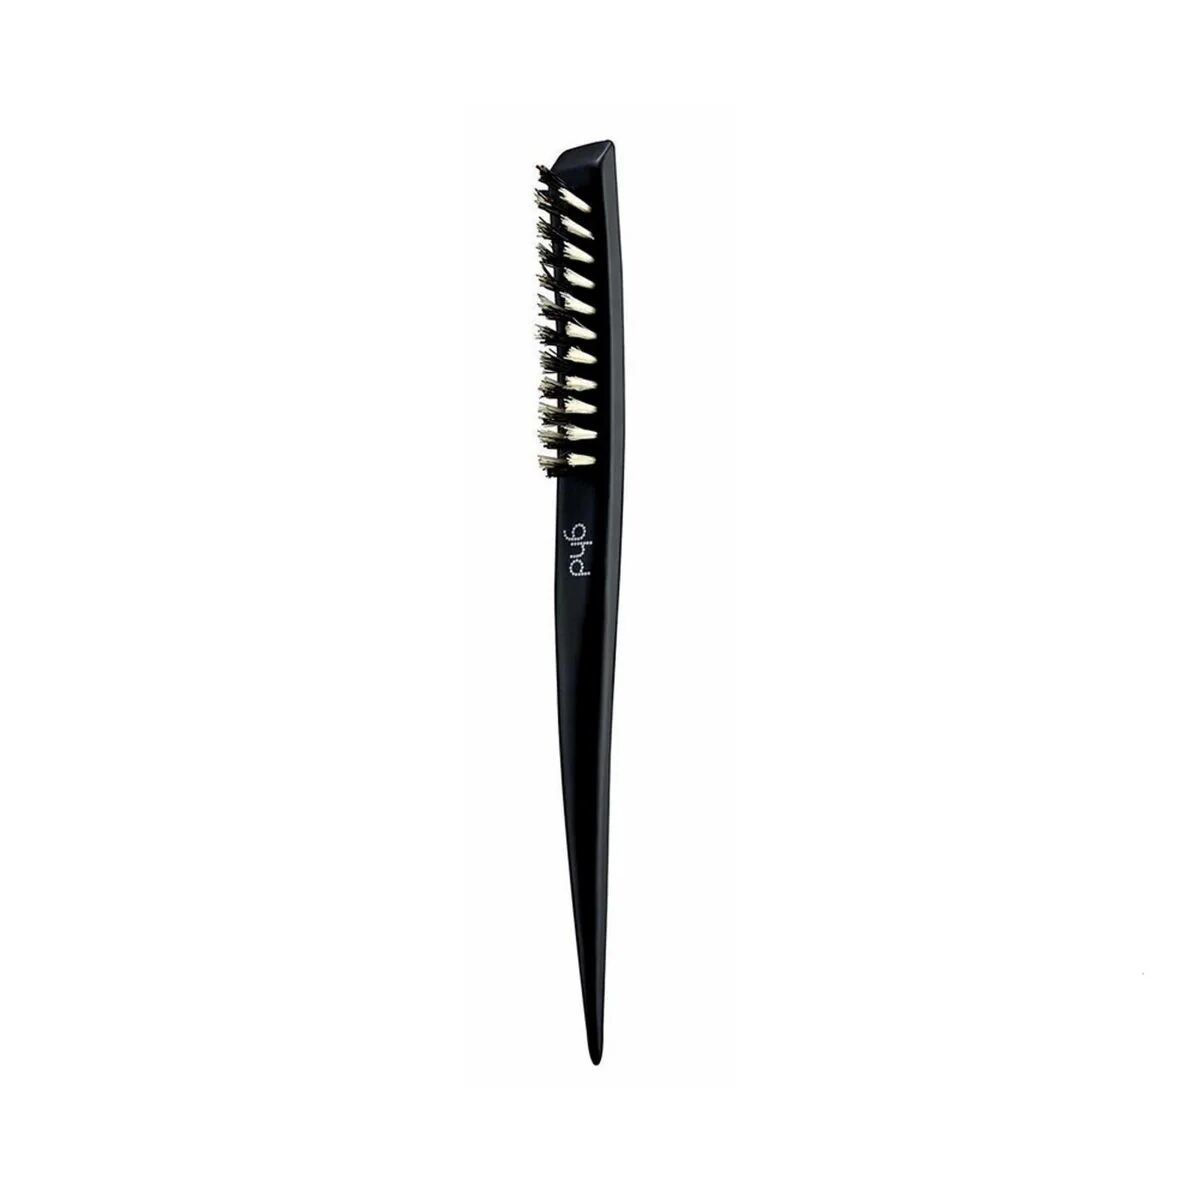 Ghd Spazzola Professionale Narrow Dressing Brush